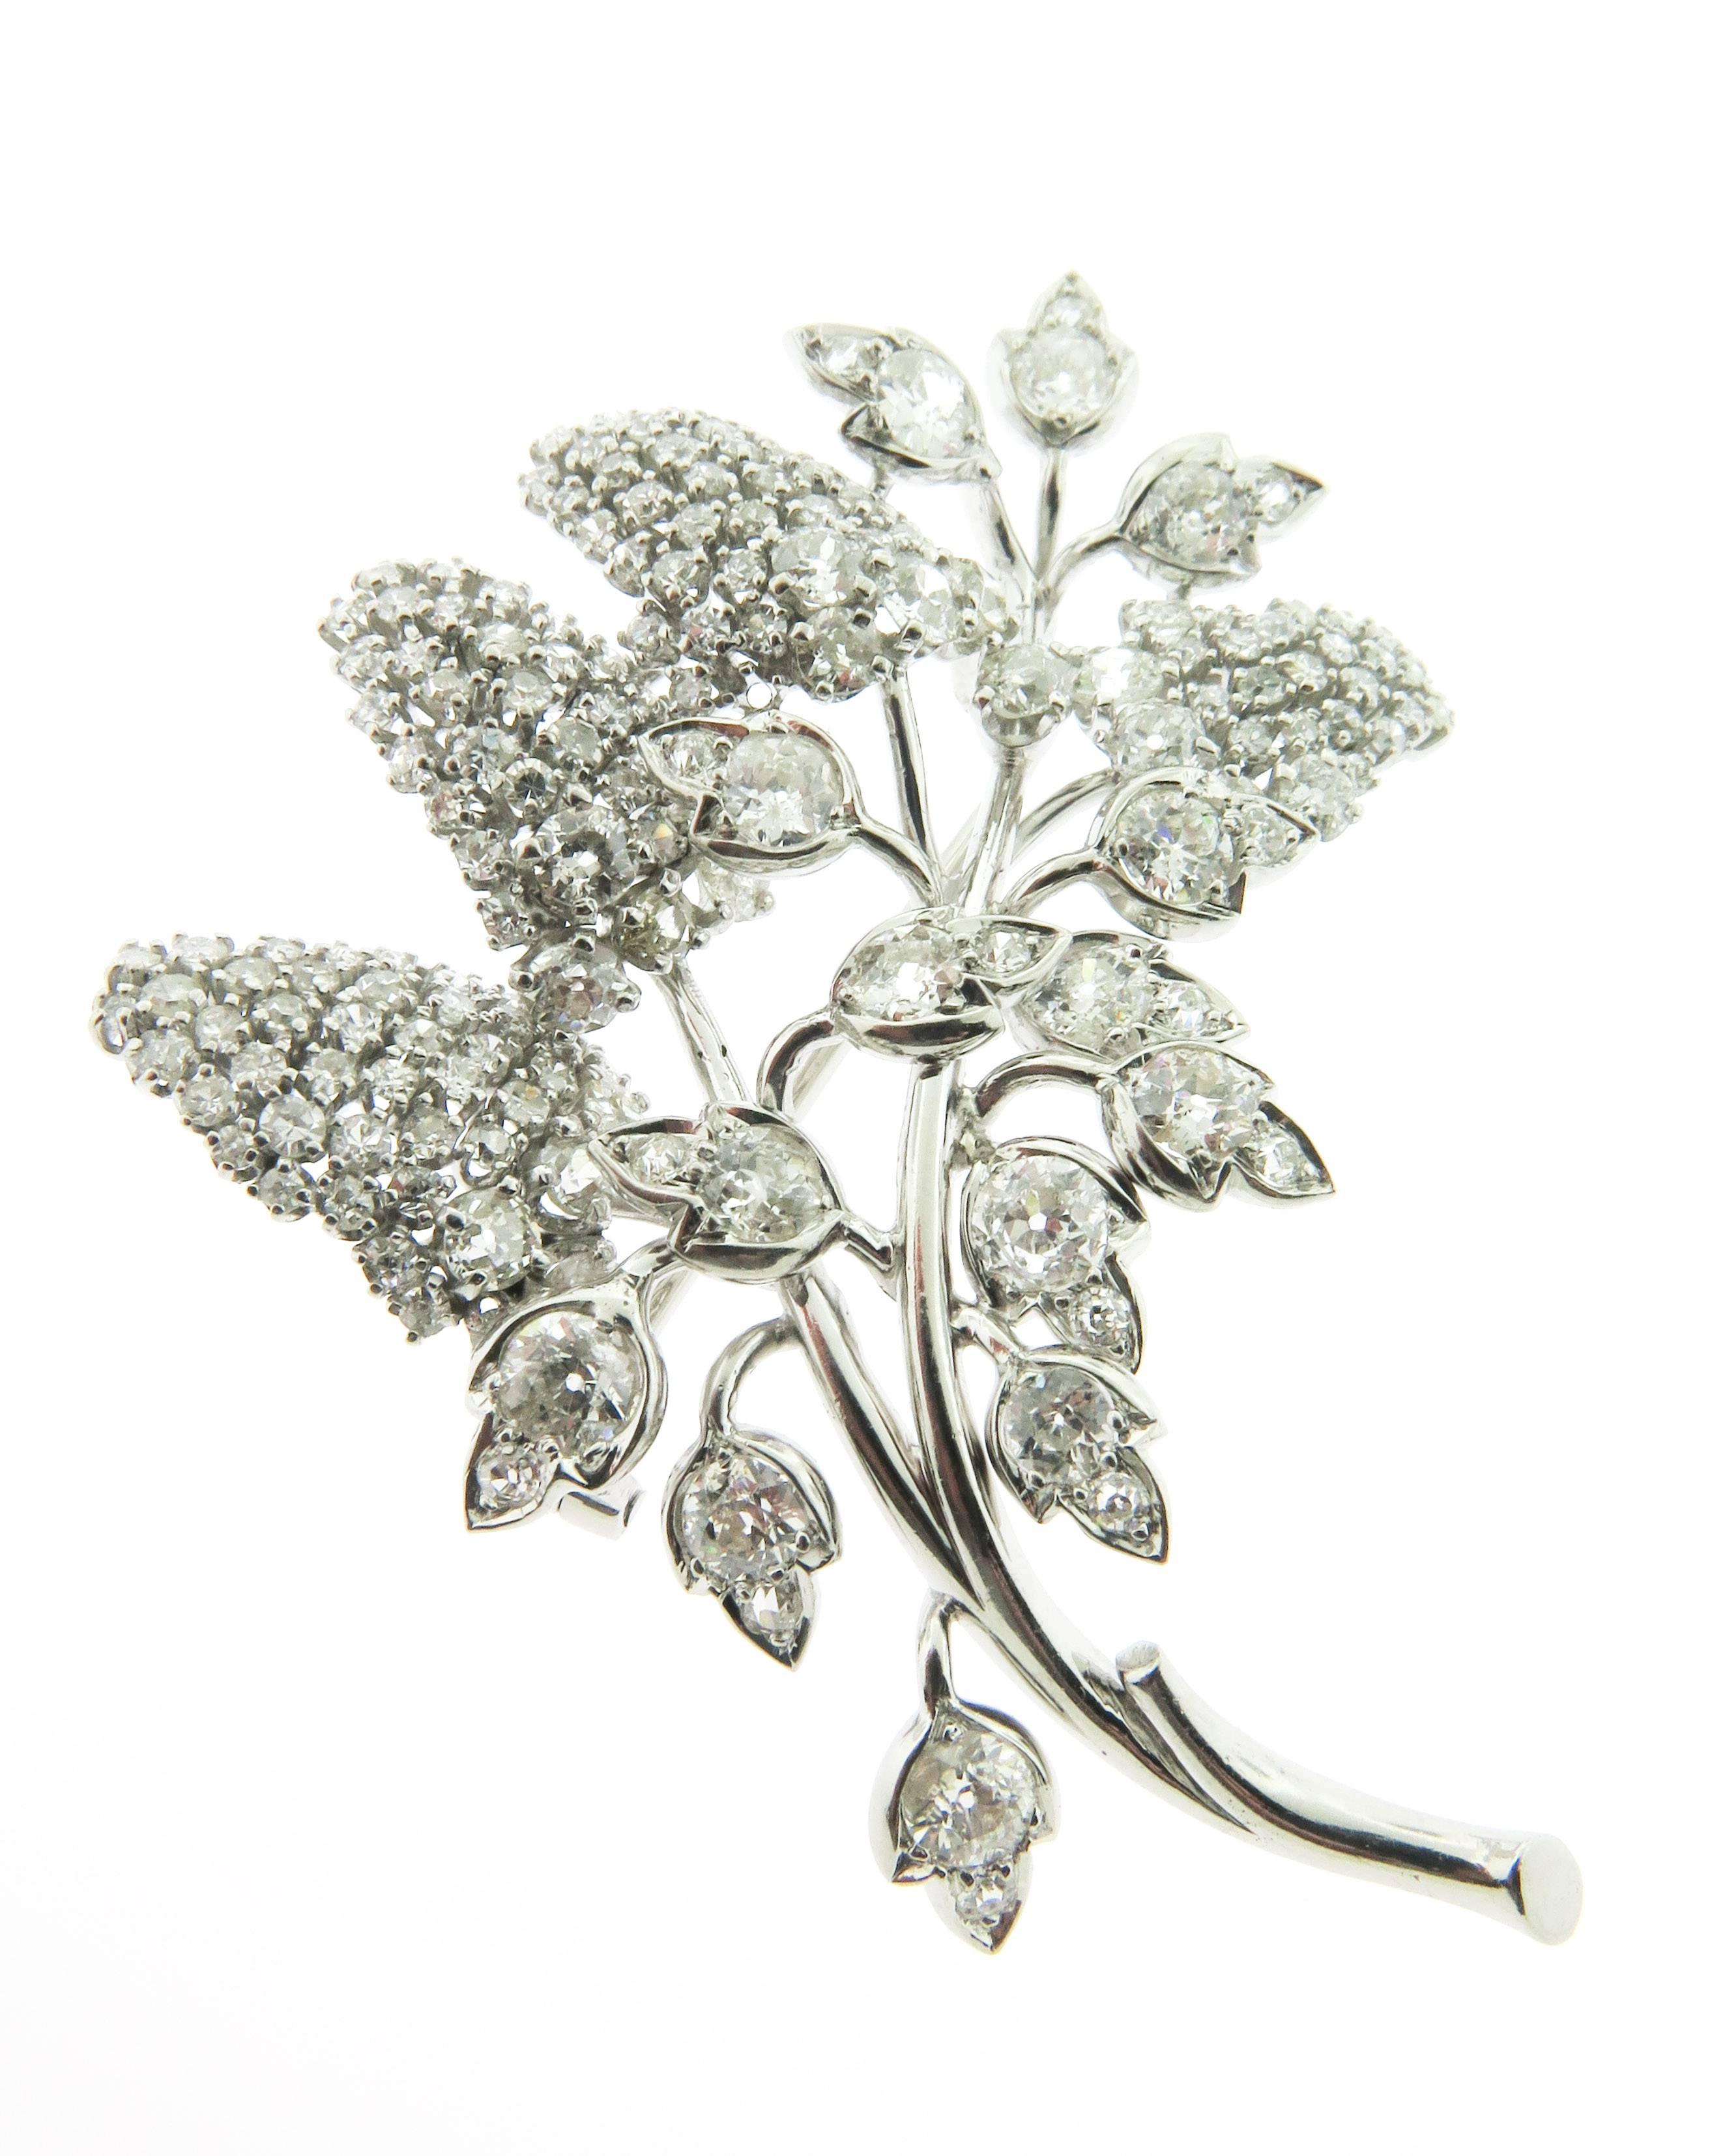 At just over two inches long this fantastic brooch is not to be missed. The combination of different sizes of old European cut diamonds, gives this piece both movement and delicacy. 
The brooch features branches meticulously designed with three